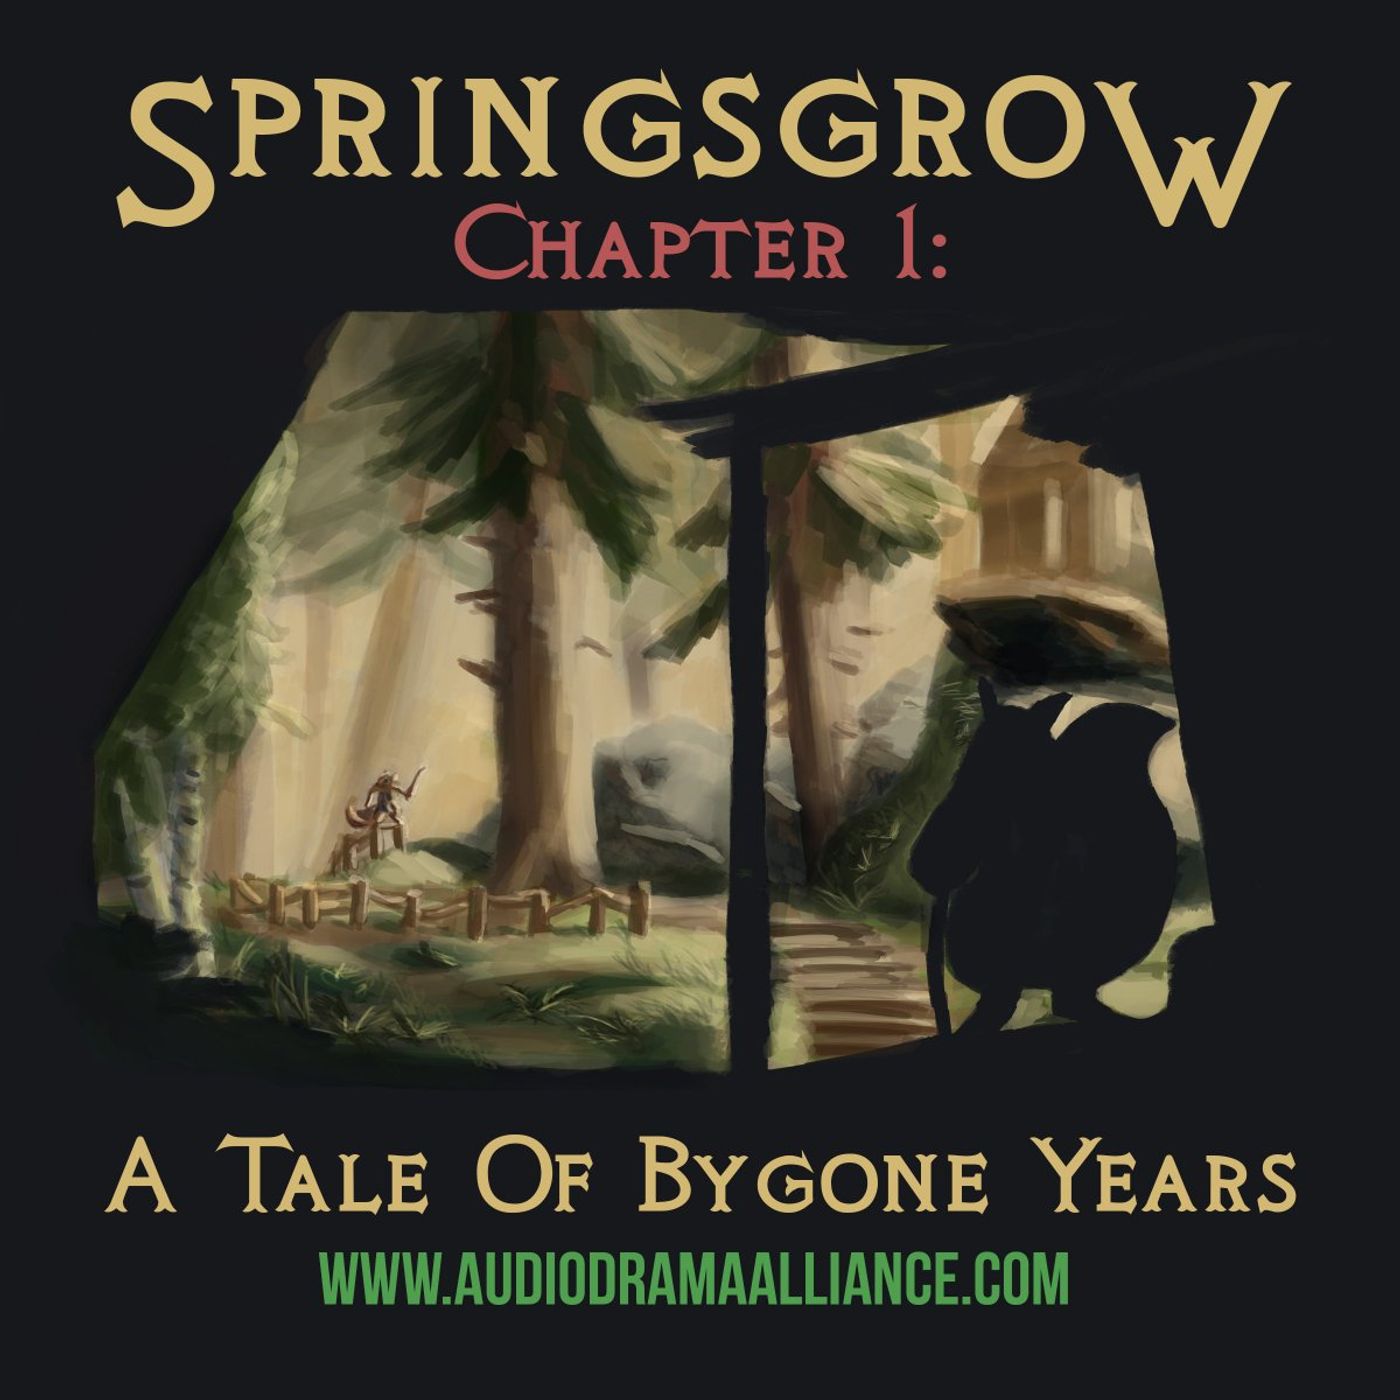 Springsgrow Chapter 1: A Tale of Bygone Years